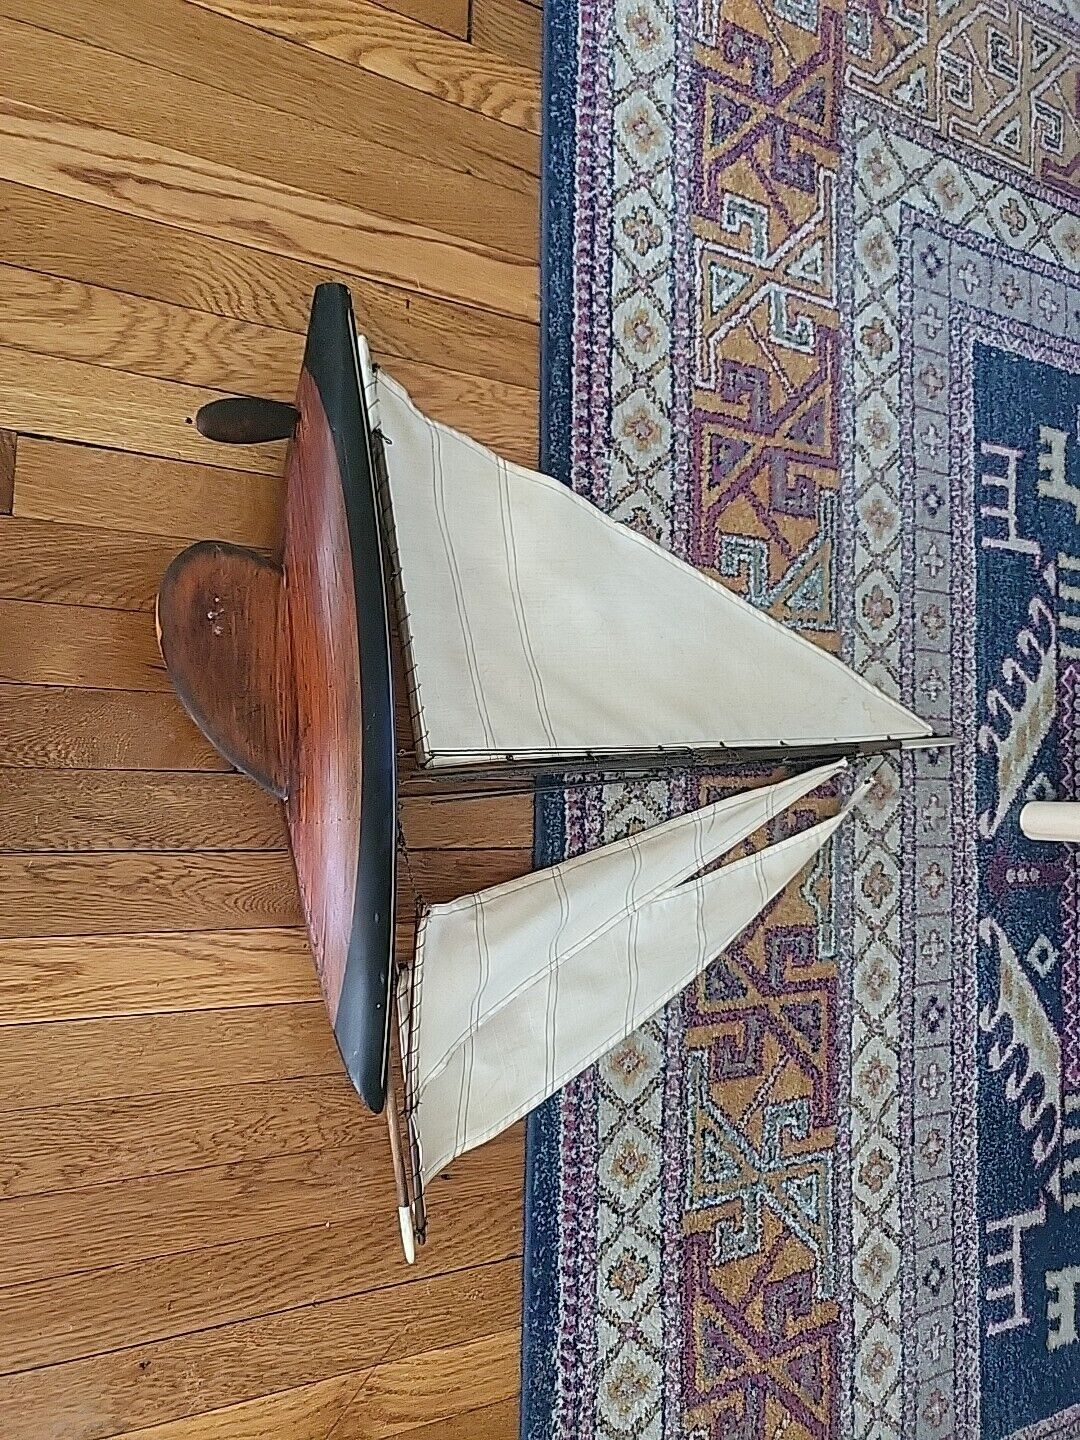 3 Sail Model Boat: with boom, jib, and complete rope system. *GREAT CONDITION*